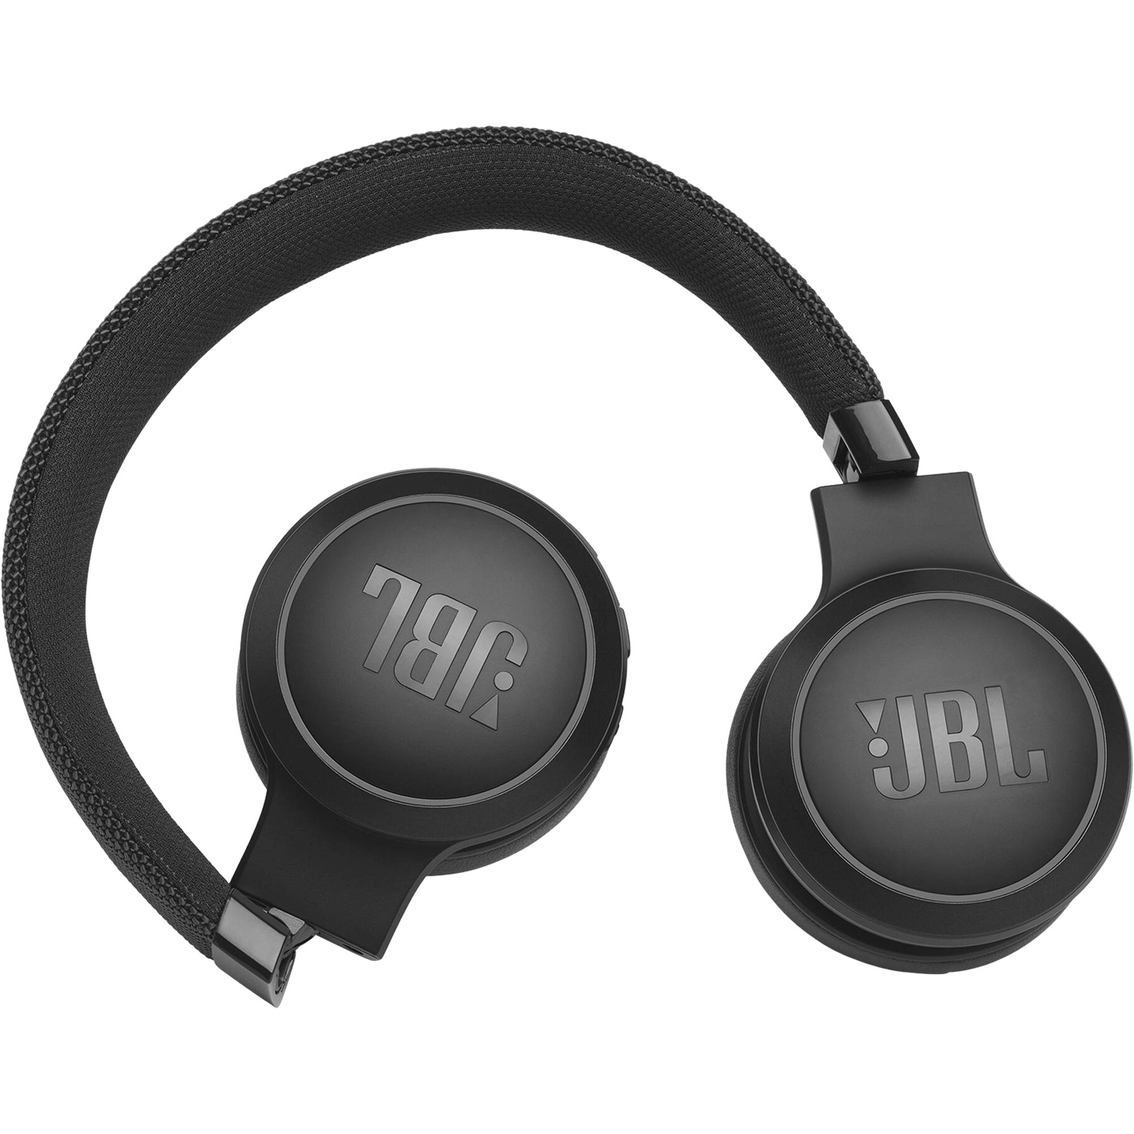 JBL Bluetooth Headphones with Voice Assistant - Image 5 of 7